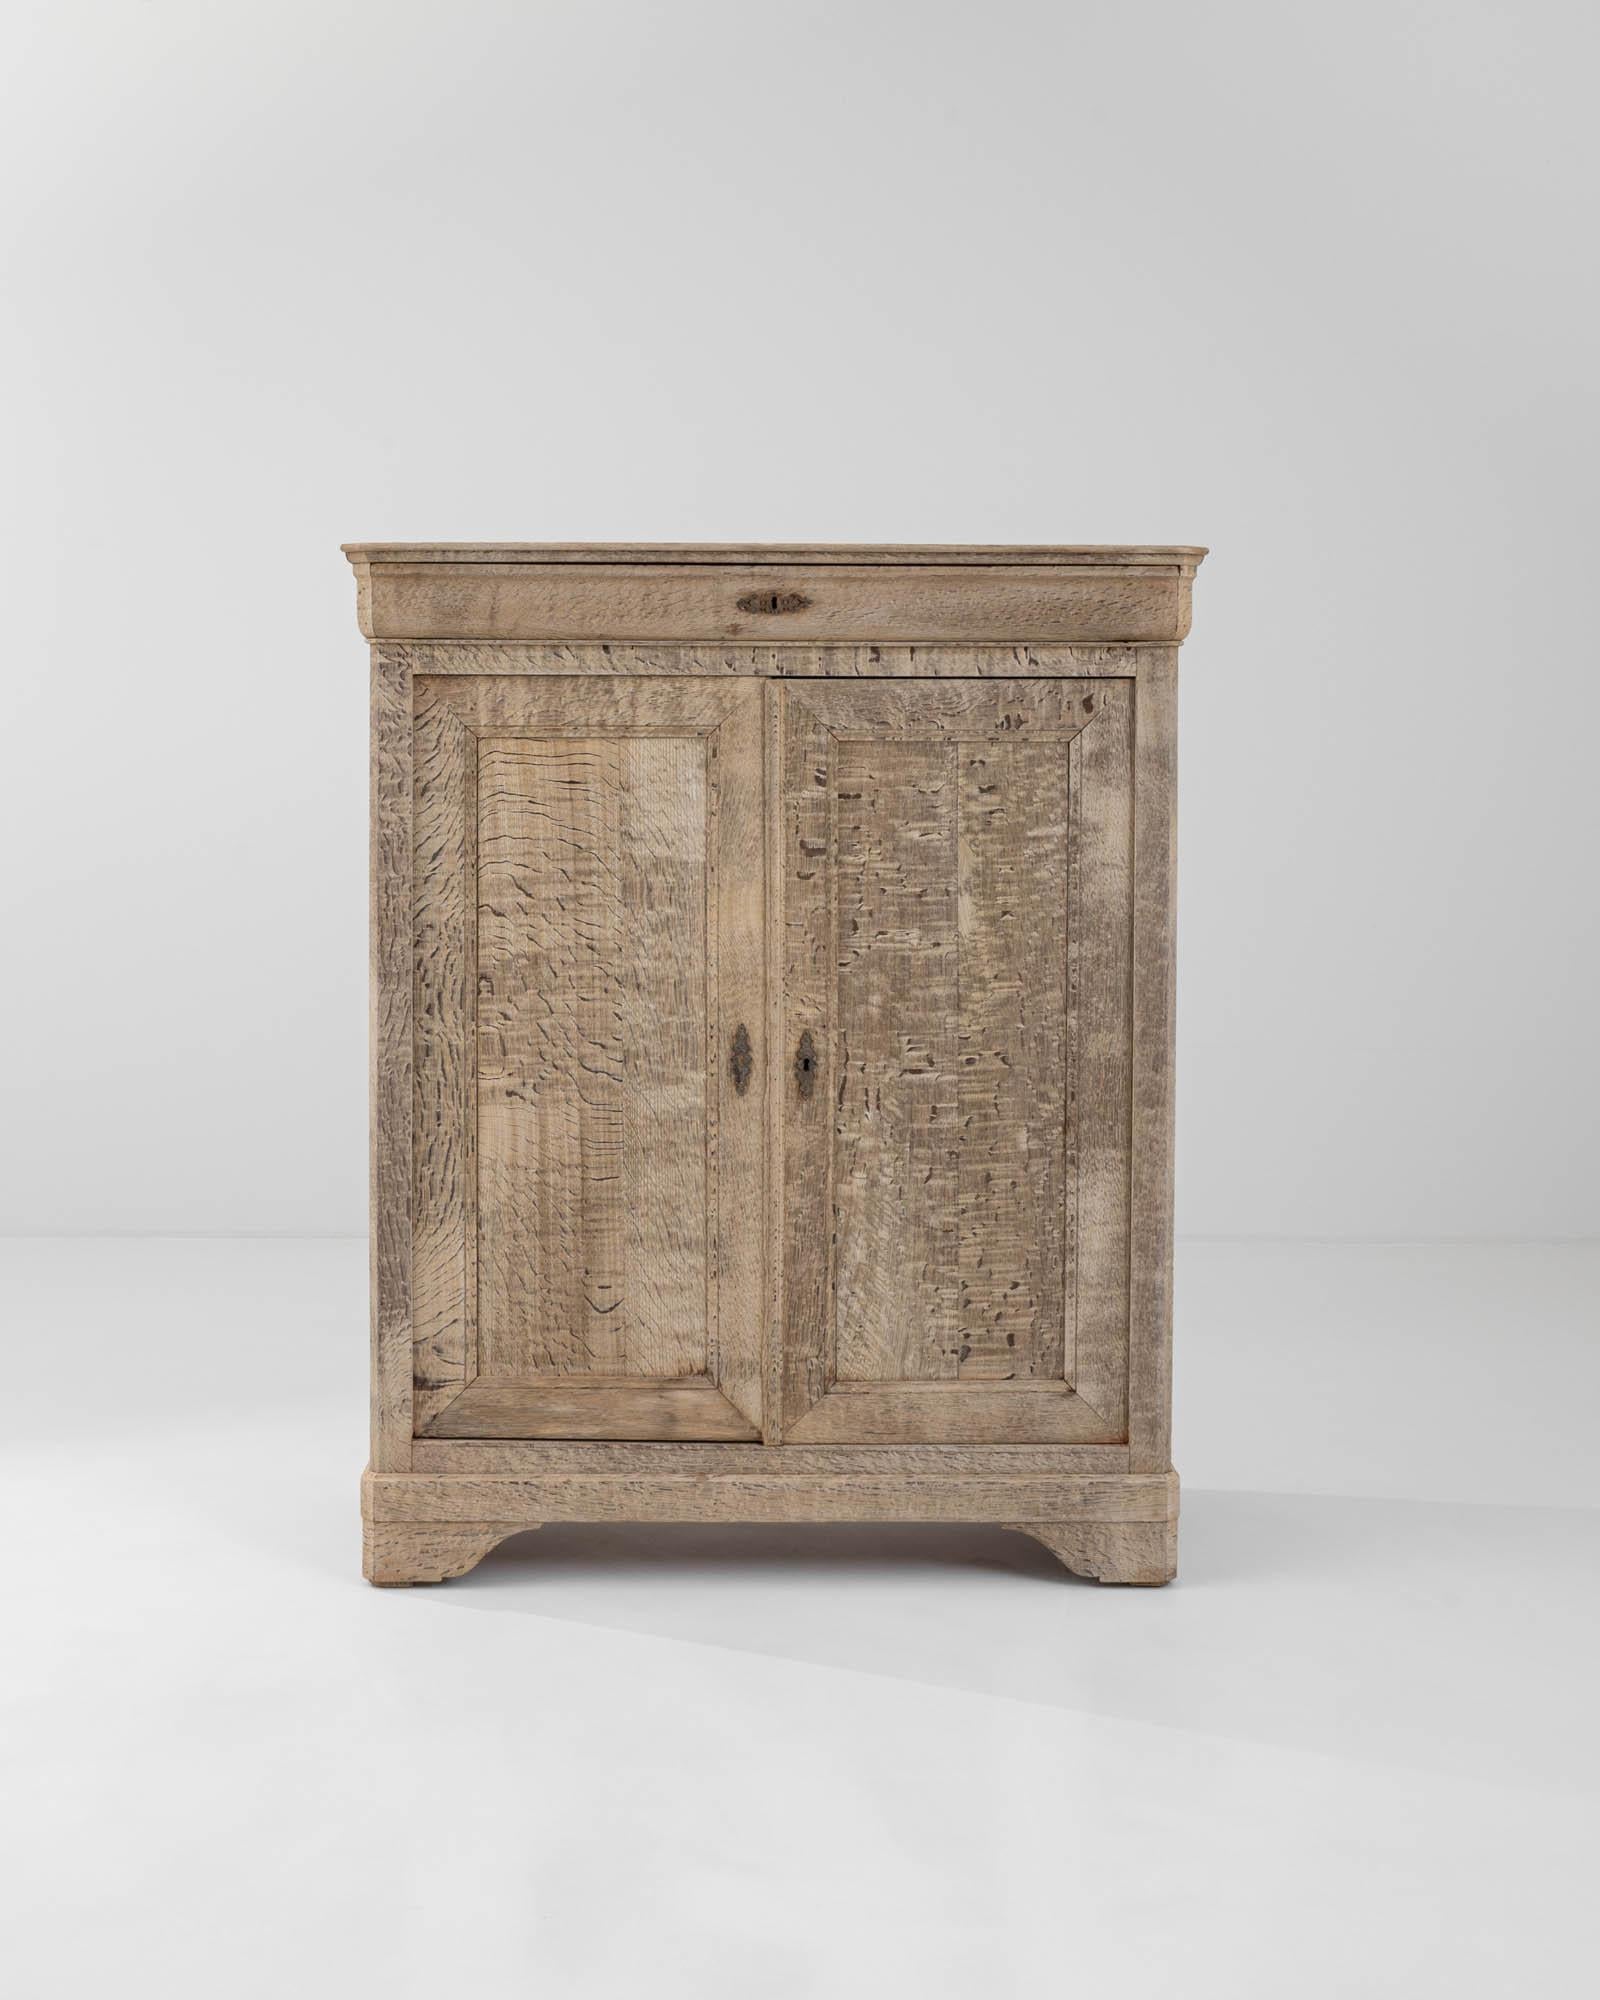 Made from refined European oak in 19th-century France, this oak buffet boasts graceful rippling patterns in the bleached wood, giving it a distinctive appeal. The top shelf, concealed within the molded cornice, complements the ogee bracket feet